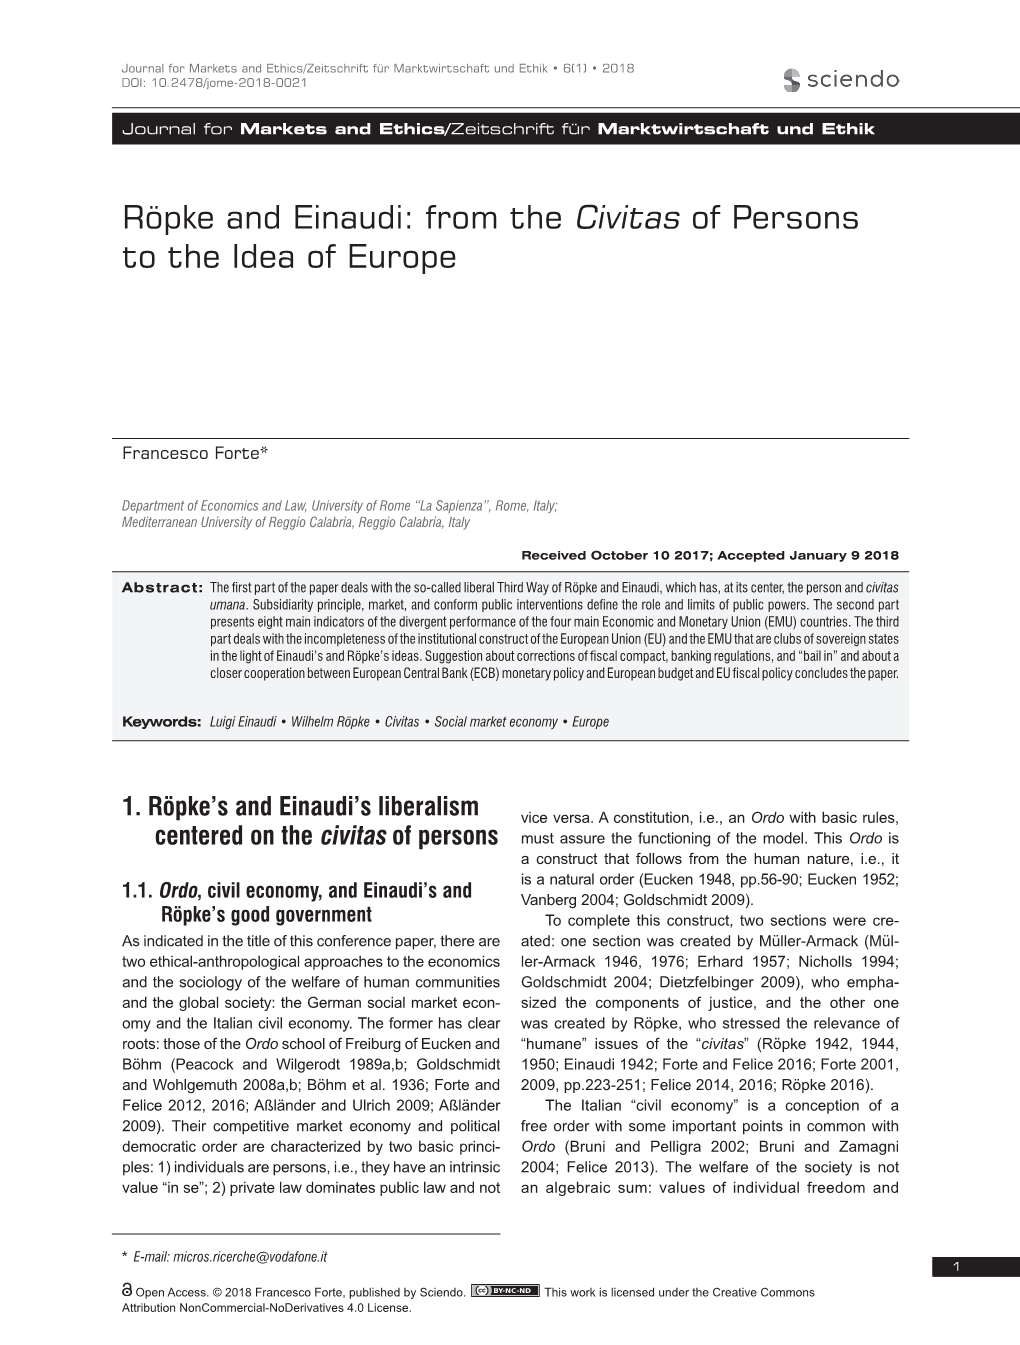 Röpke and Einaudi: from the Civitas of Persons to the Idea of Europe